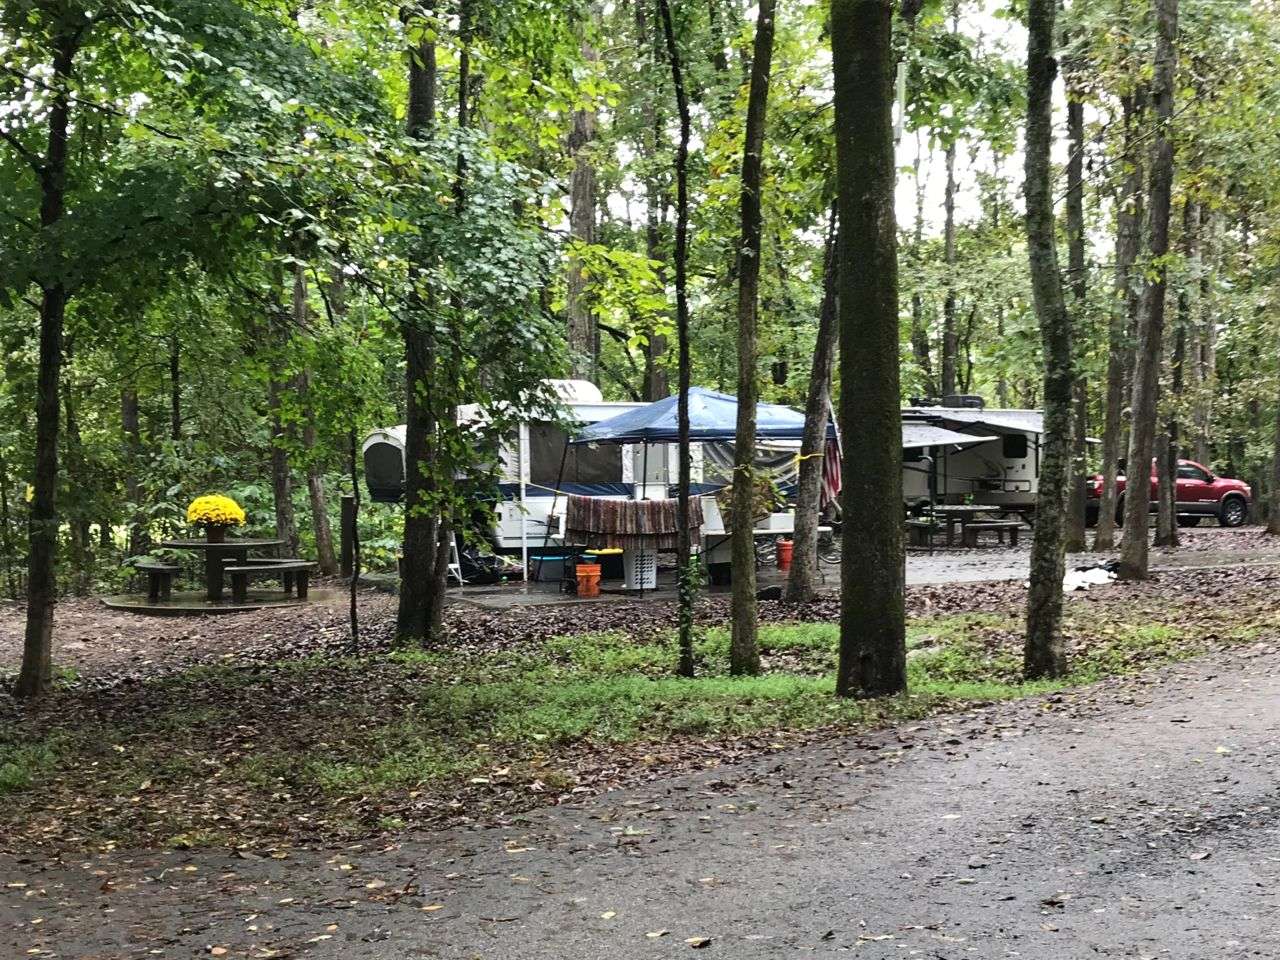 Camping along the Duck River at Henry Horton State Park